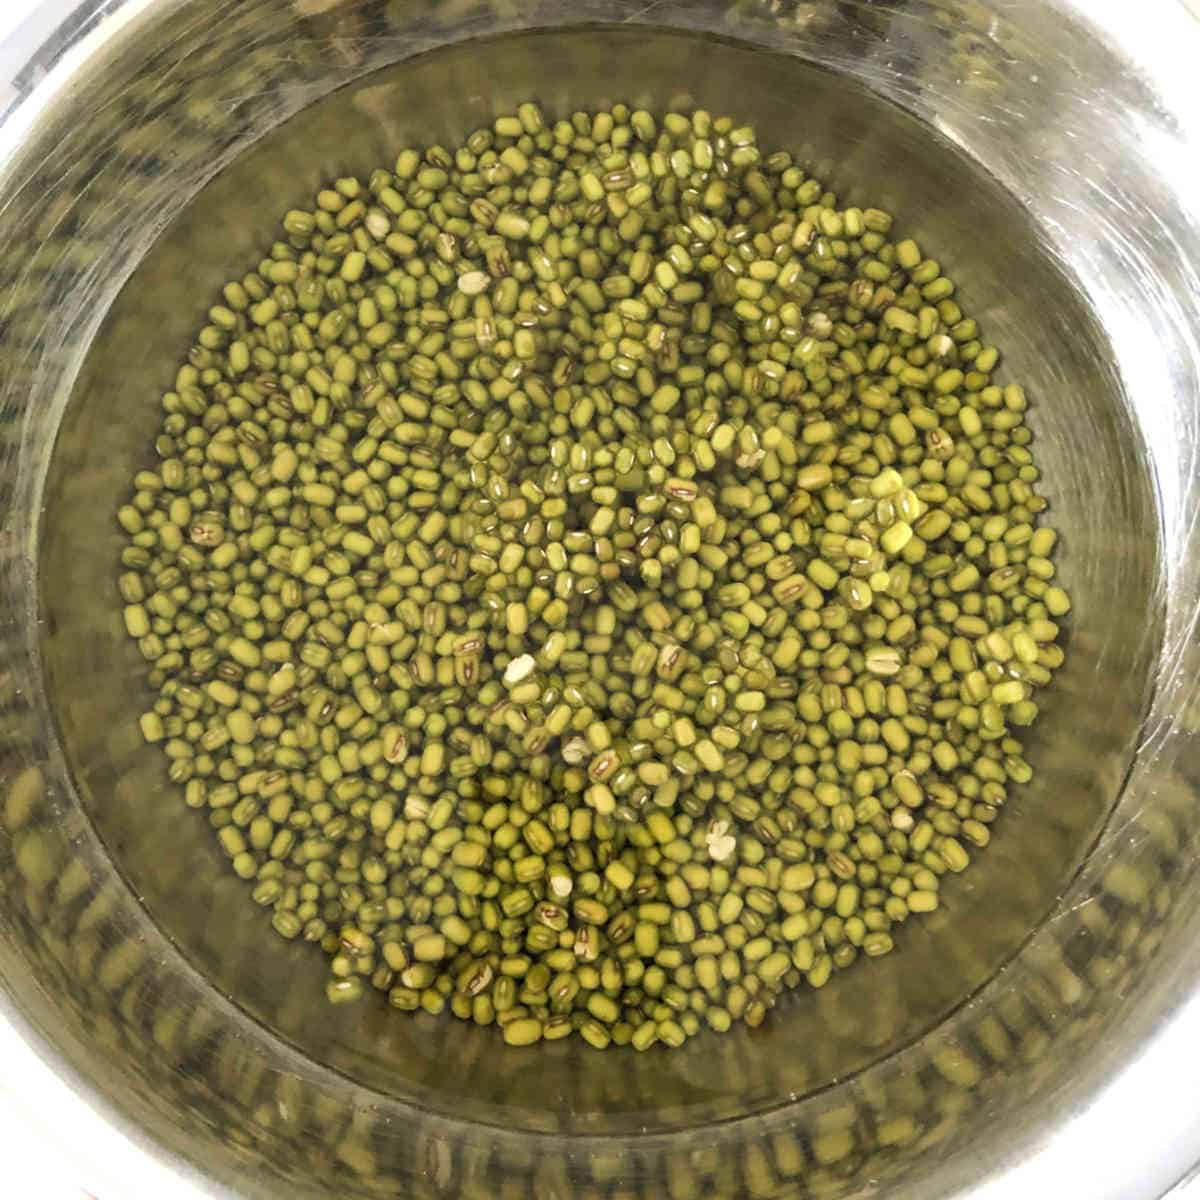 Soaked mung beans in a steel bowl.